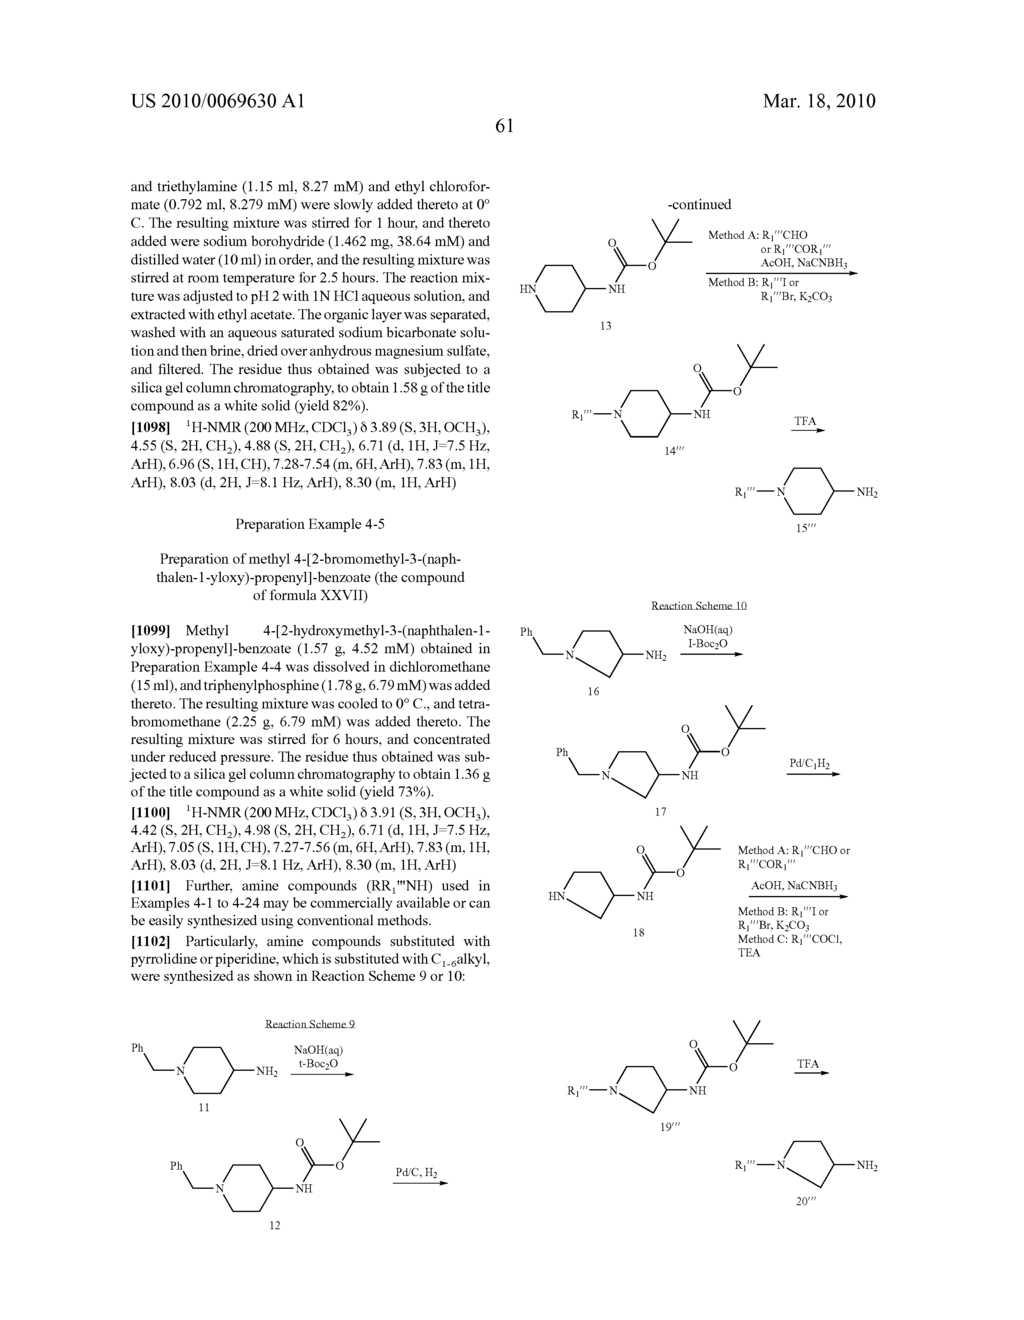 NAPHTHALENYLOXYPROPENYL DERIVATIVES HAVING INHIBITORY ACTIVITY AGAINST HISTONE DEACETYLASE AND PHARMACEUTICAL COMPOSITION COMPRISING THE SAME - diagram, schematic, and image 62